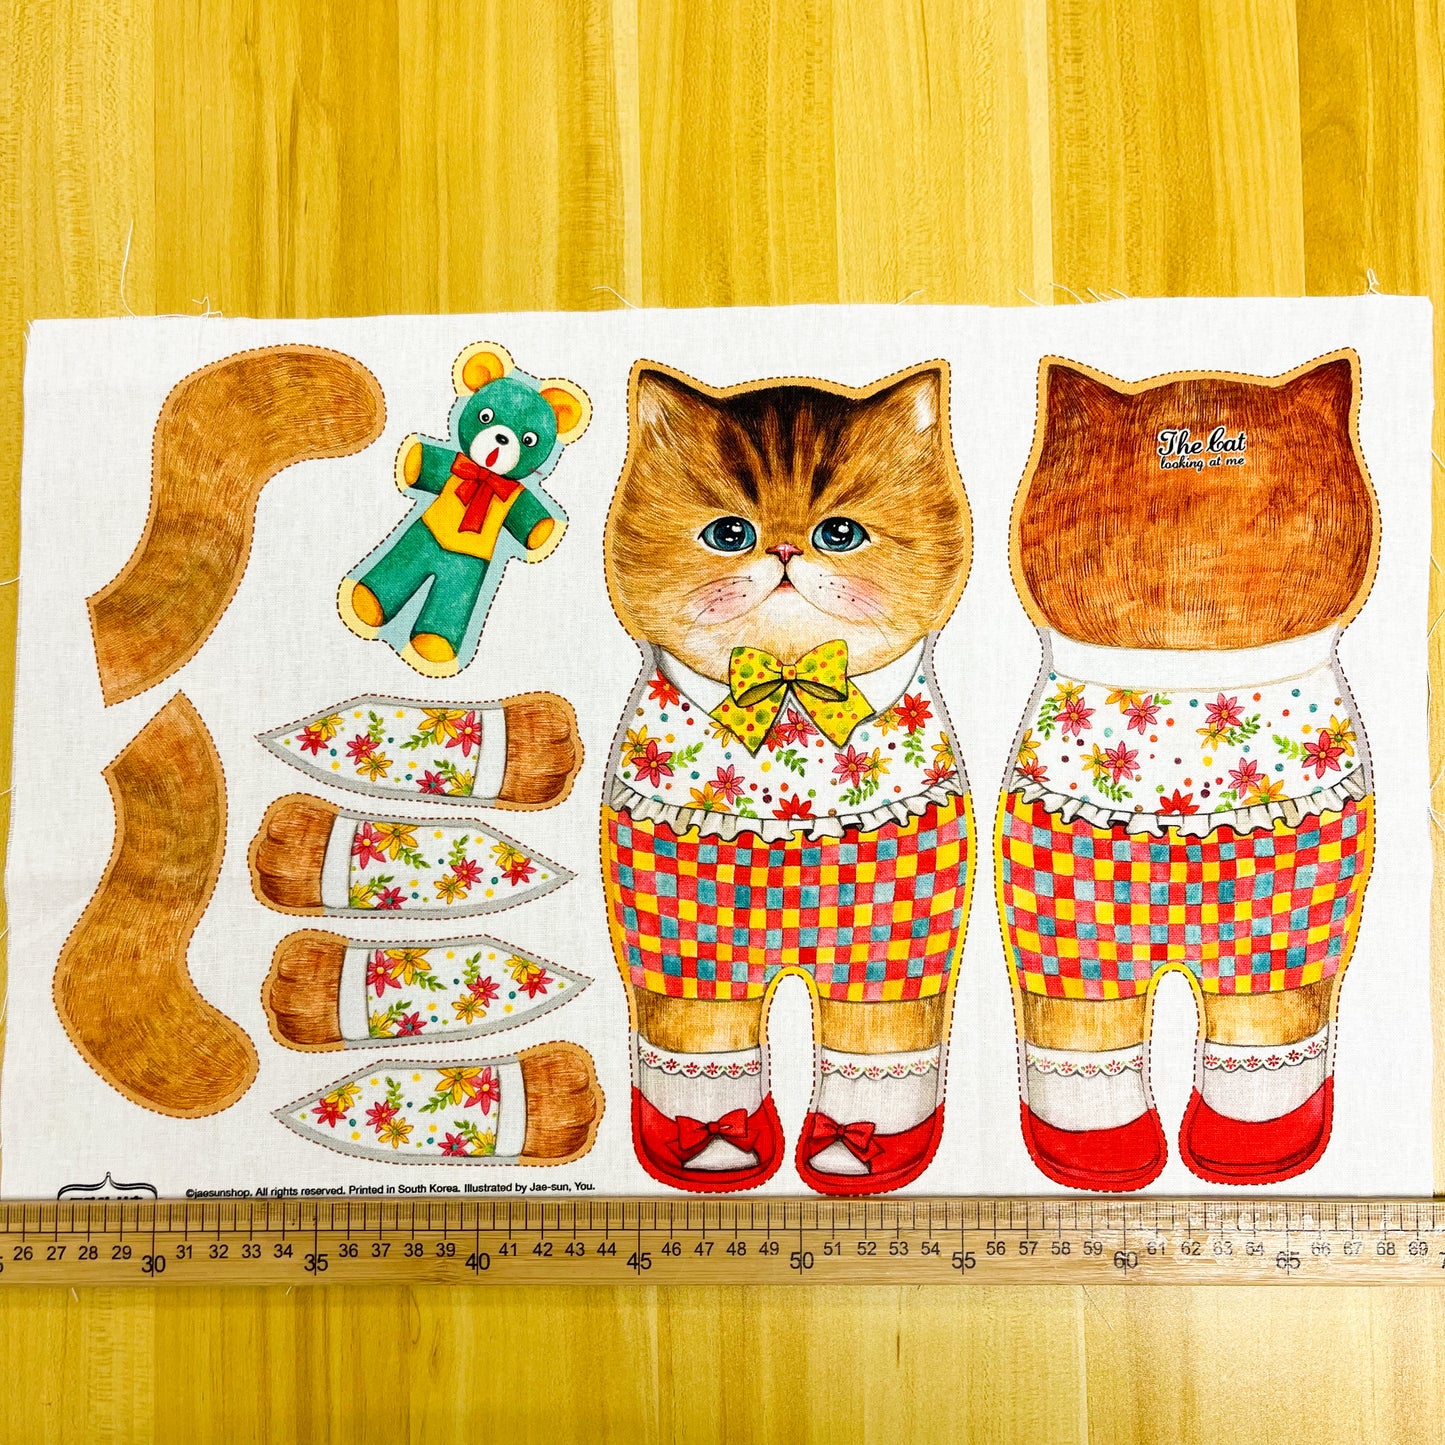 Unclecat 貓叔叔 | diy fabric for making cat doll "Check" | cotton linen 棉麻